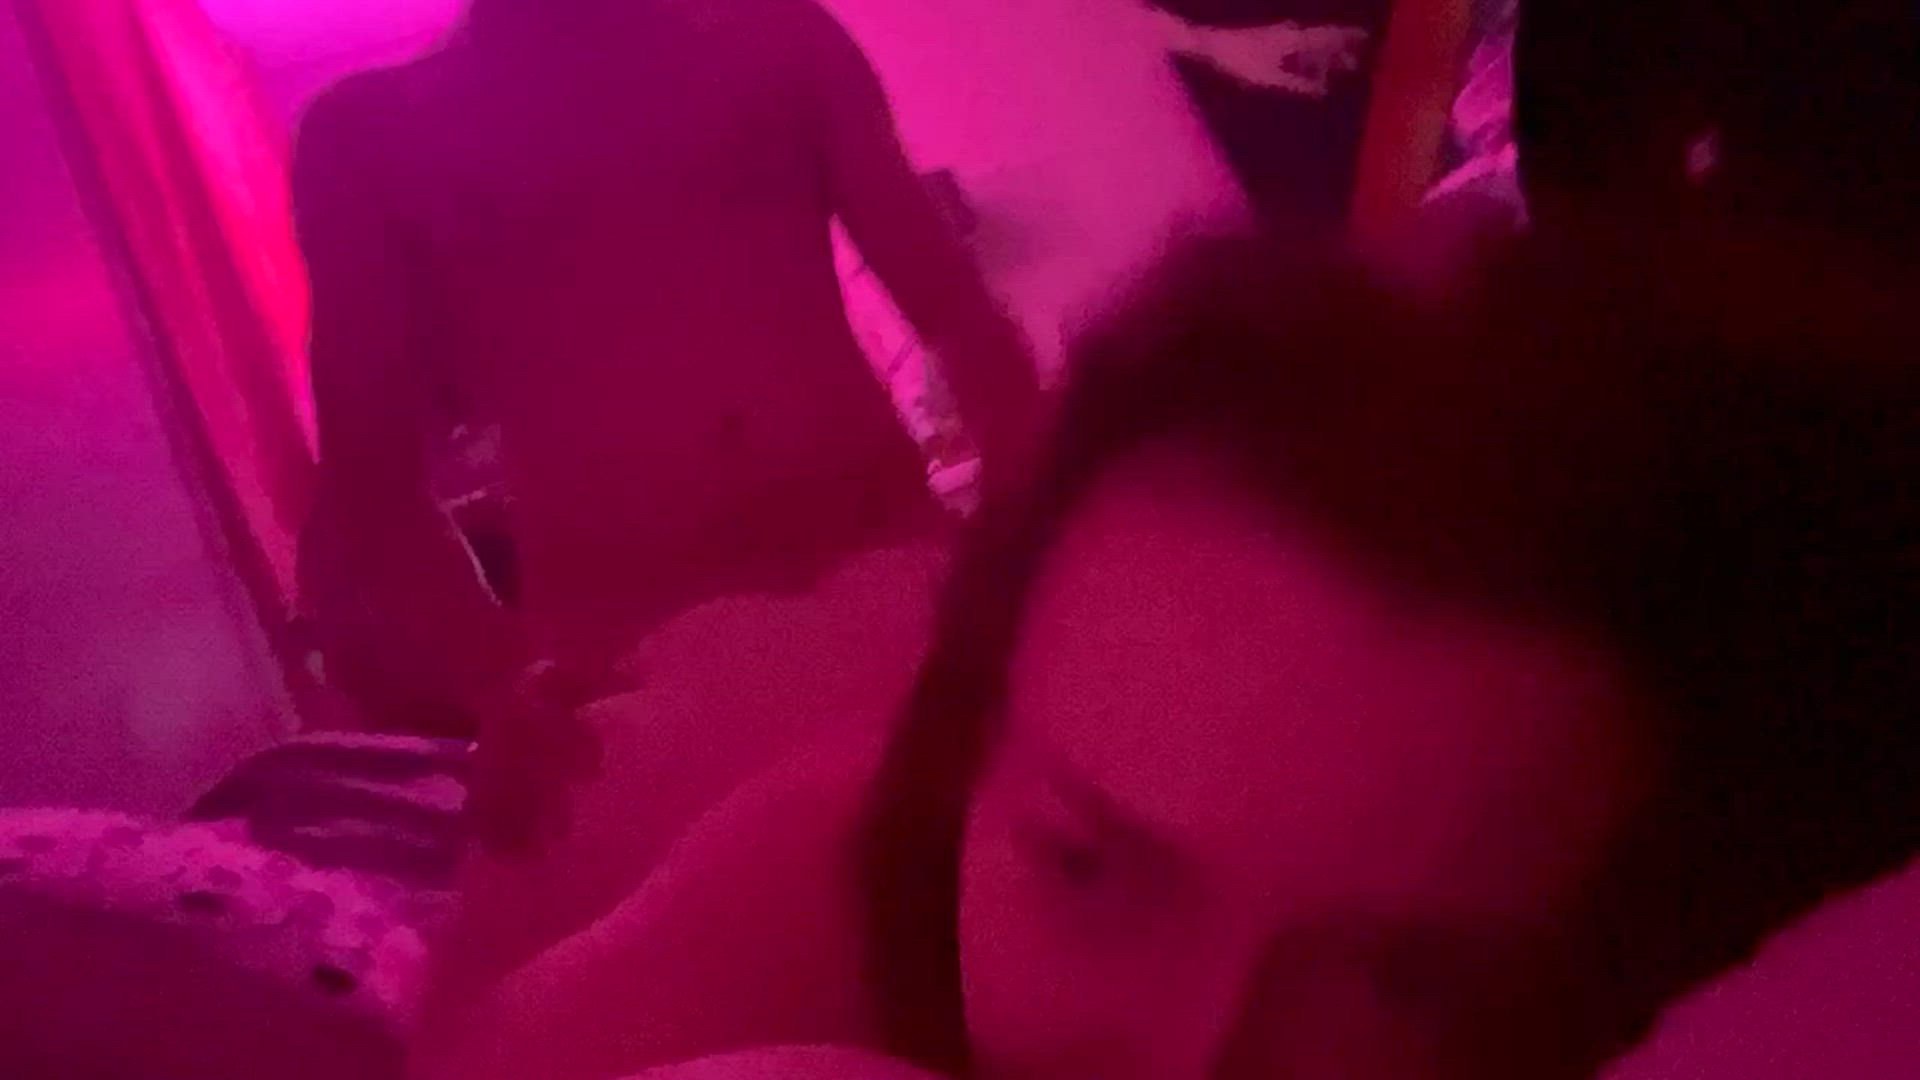 Amateur porn video with onlyfans model missmarnie333 <strong>@missmarnie333</strong>